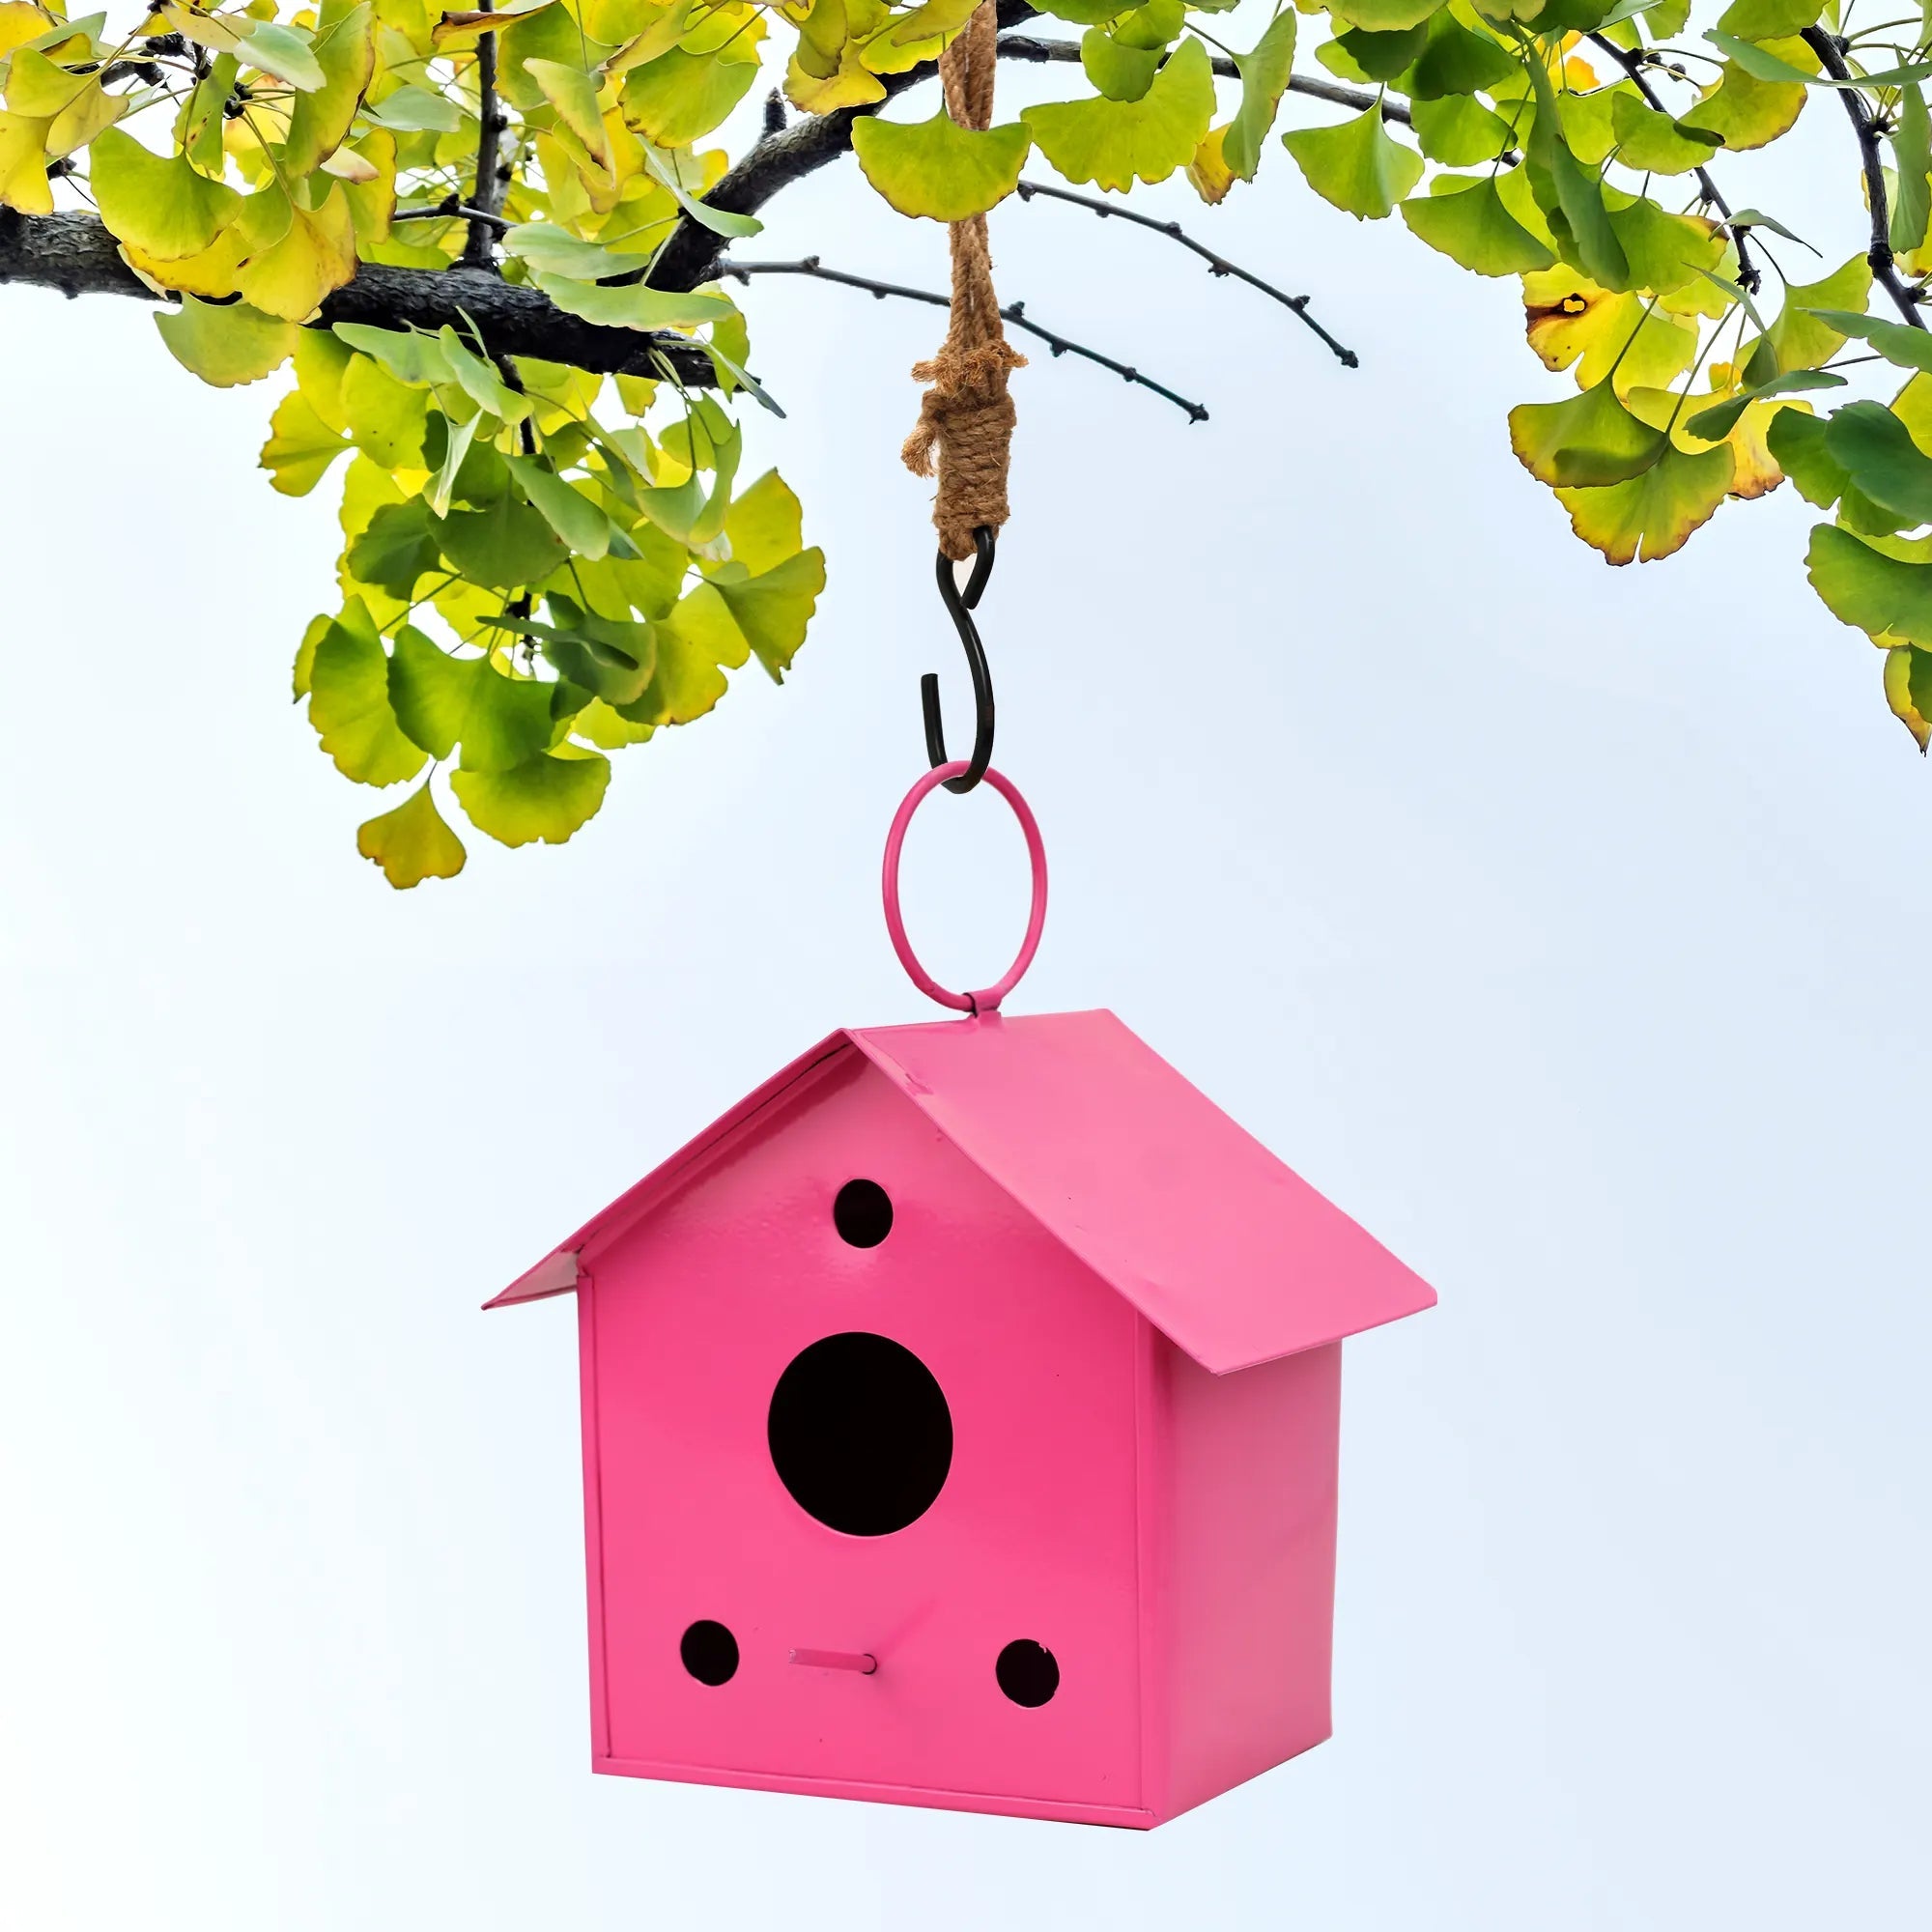 Colorful Metal Hanging Bird House Oval Balcony Hanging Pot Urban Plant Pink 